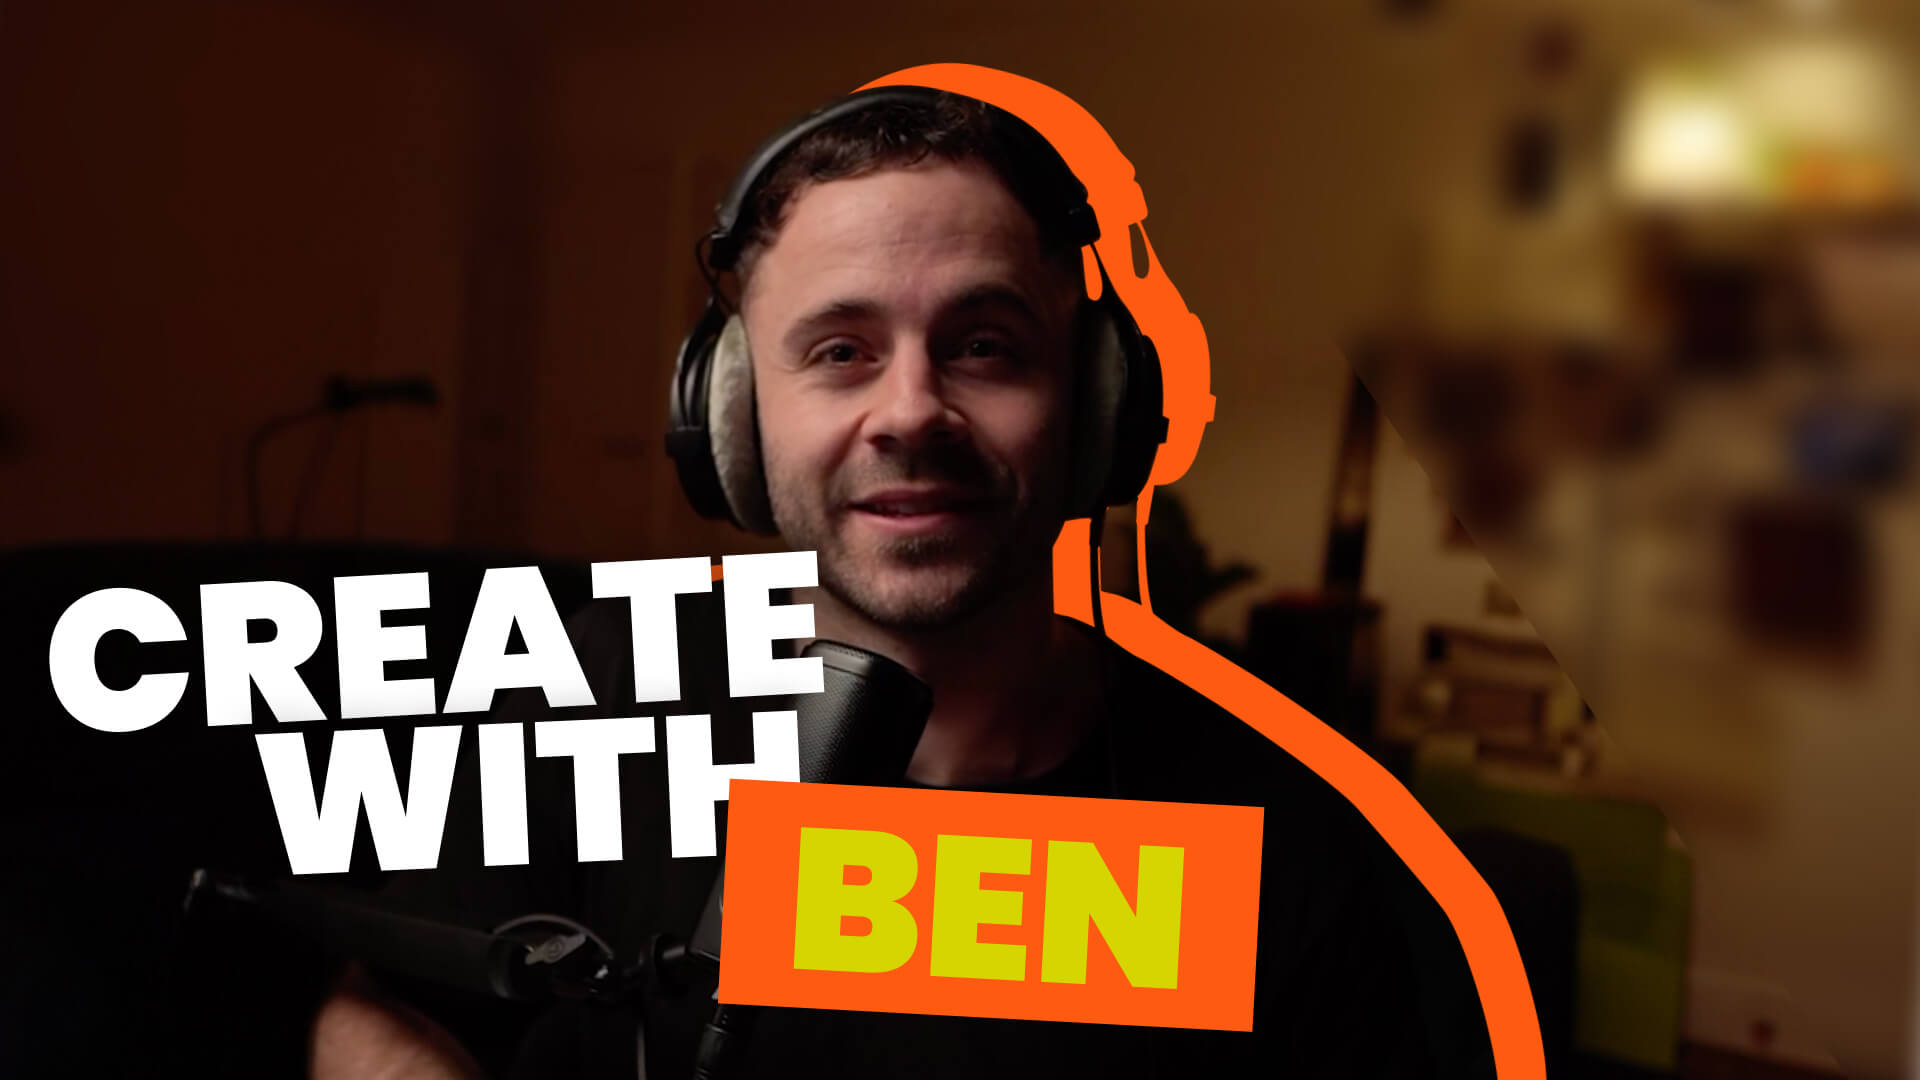 CREATE WITH BEN